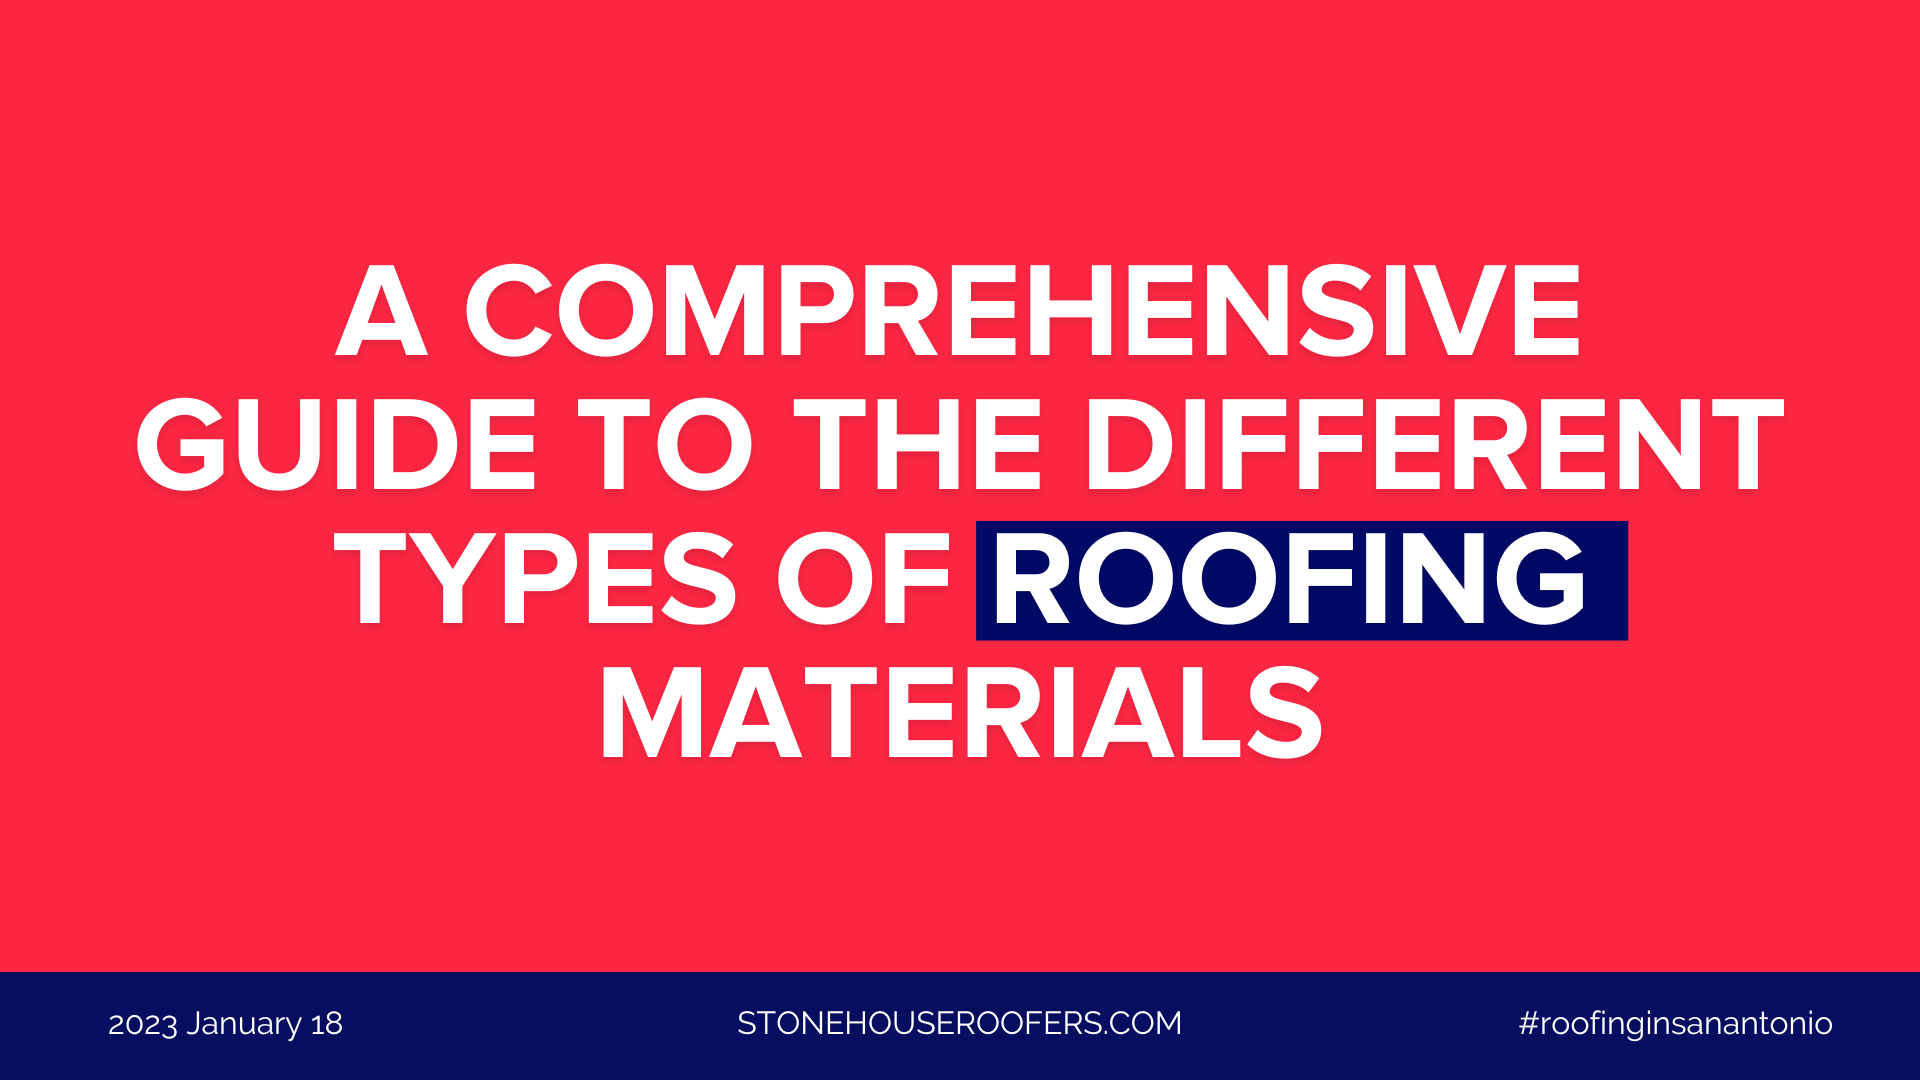 A Comprehensive Guide To The Different Types Of Roofing Materials